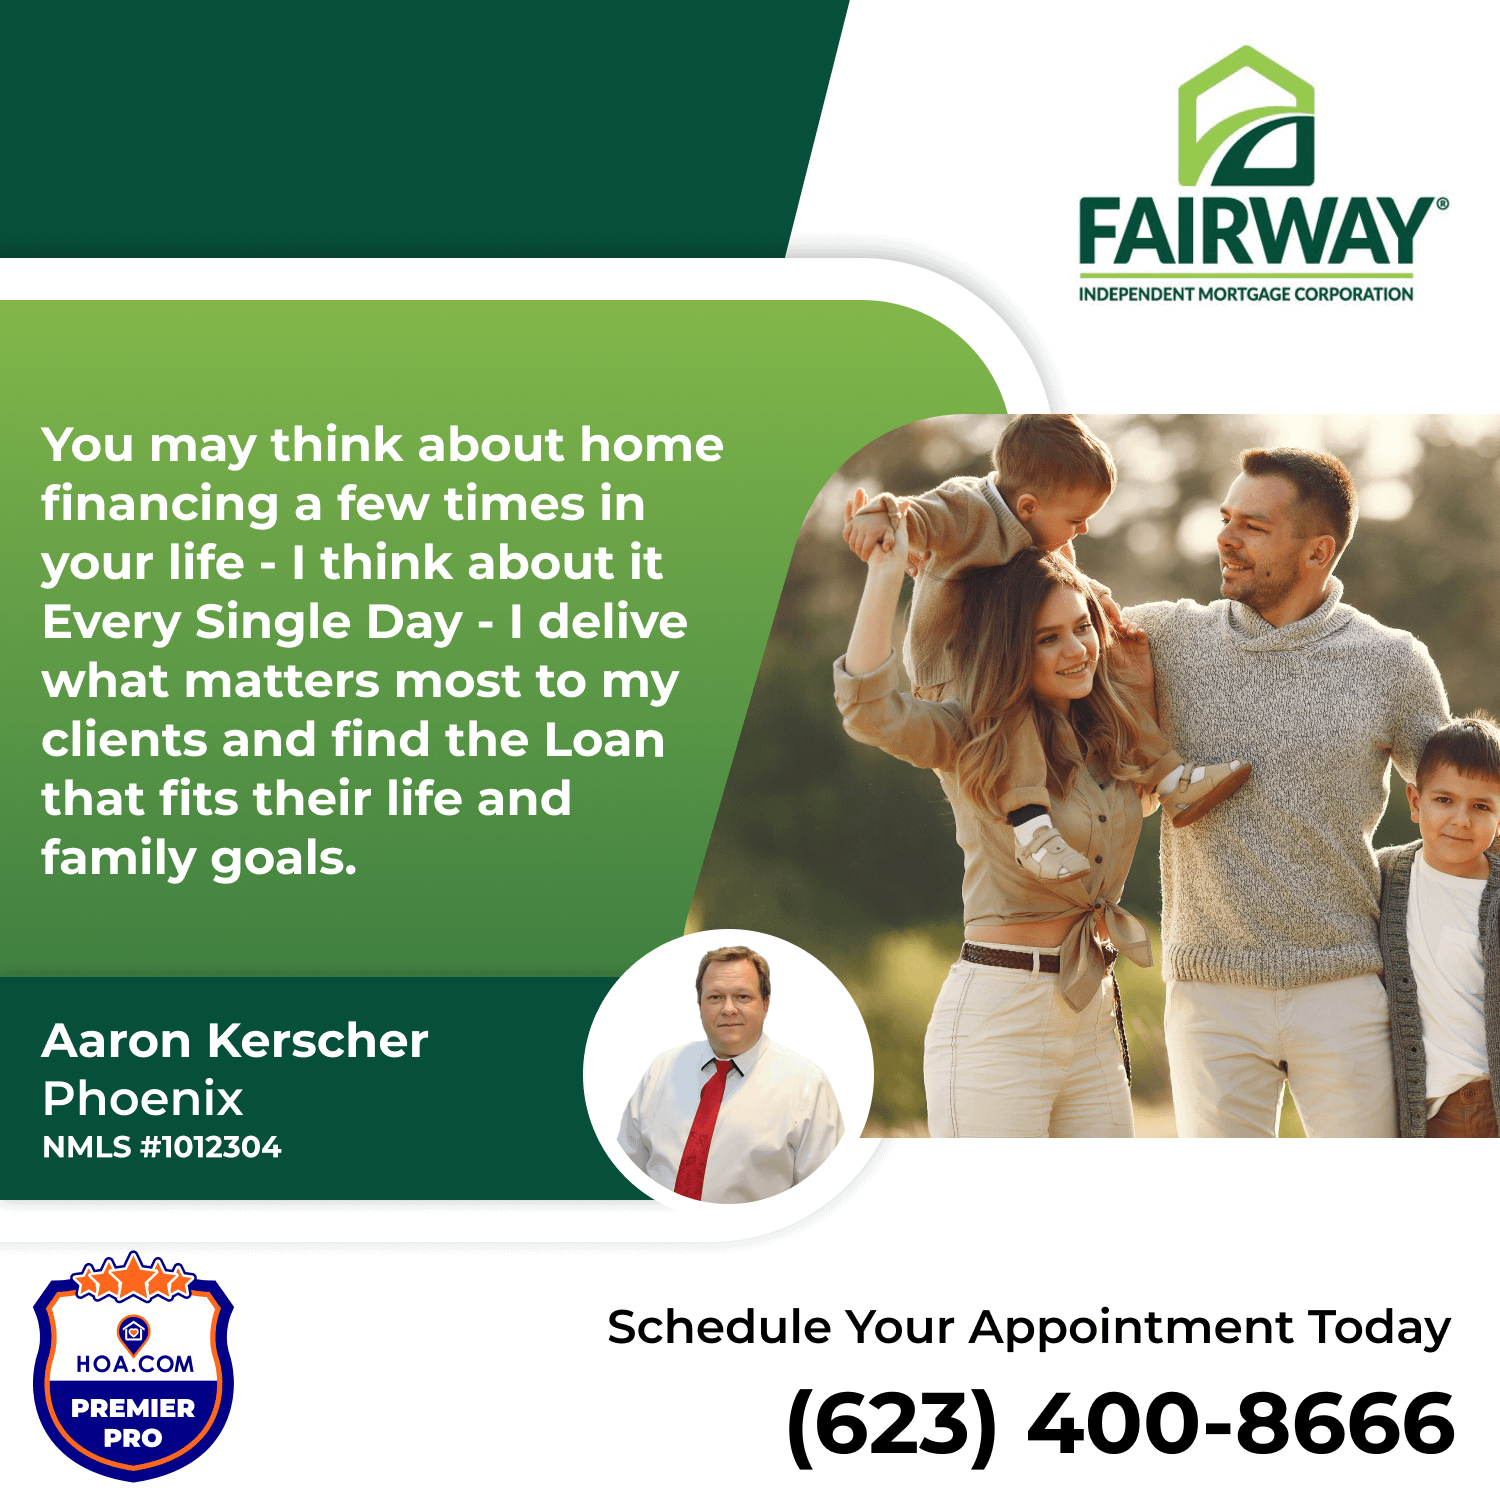 Fairway Mortgage Loan that best fits you